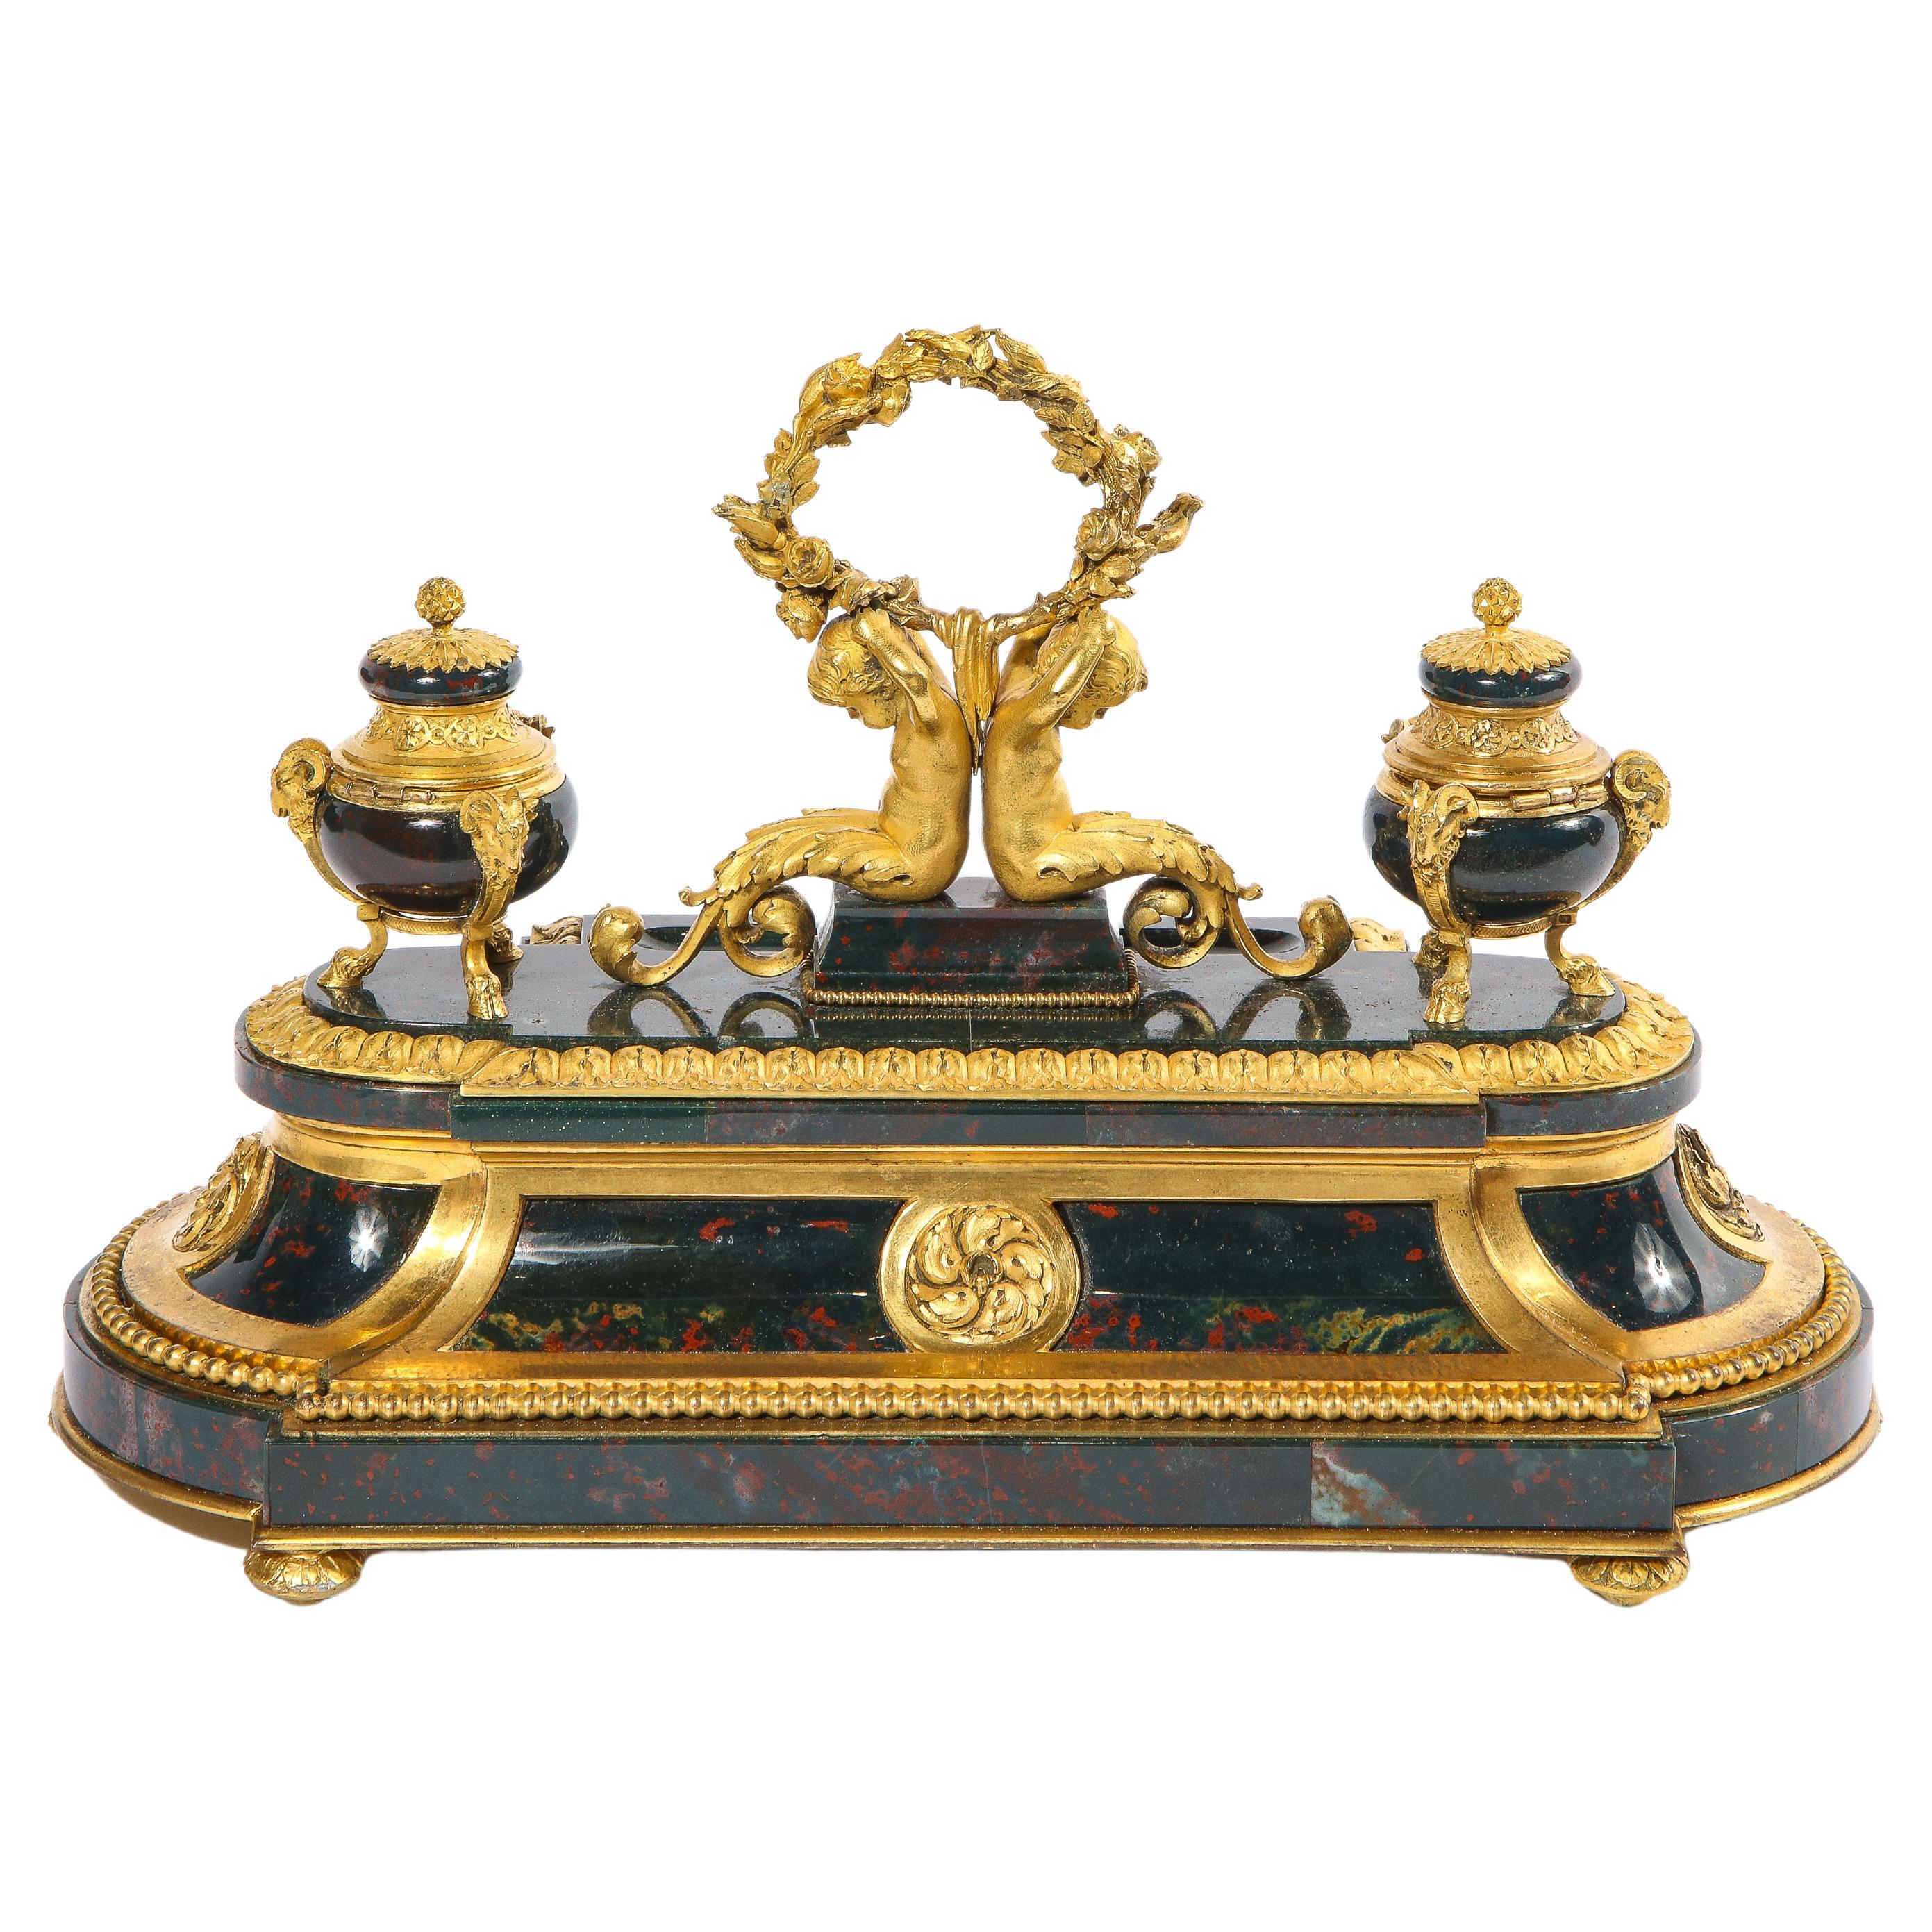 An Exquisite and Rare French Louis XVI Style Ormolu-Mounted Bloodstone Inkwell For Sale